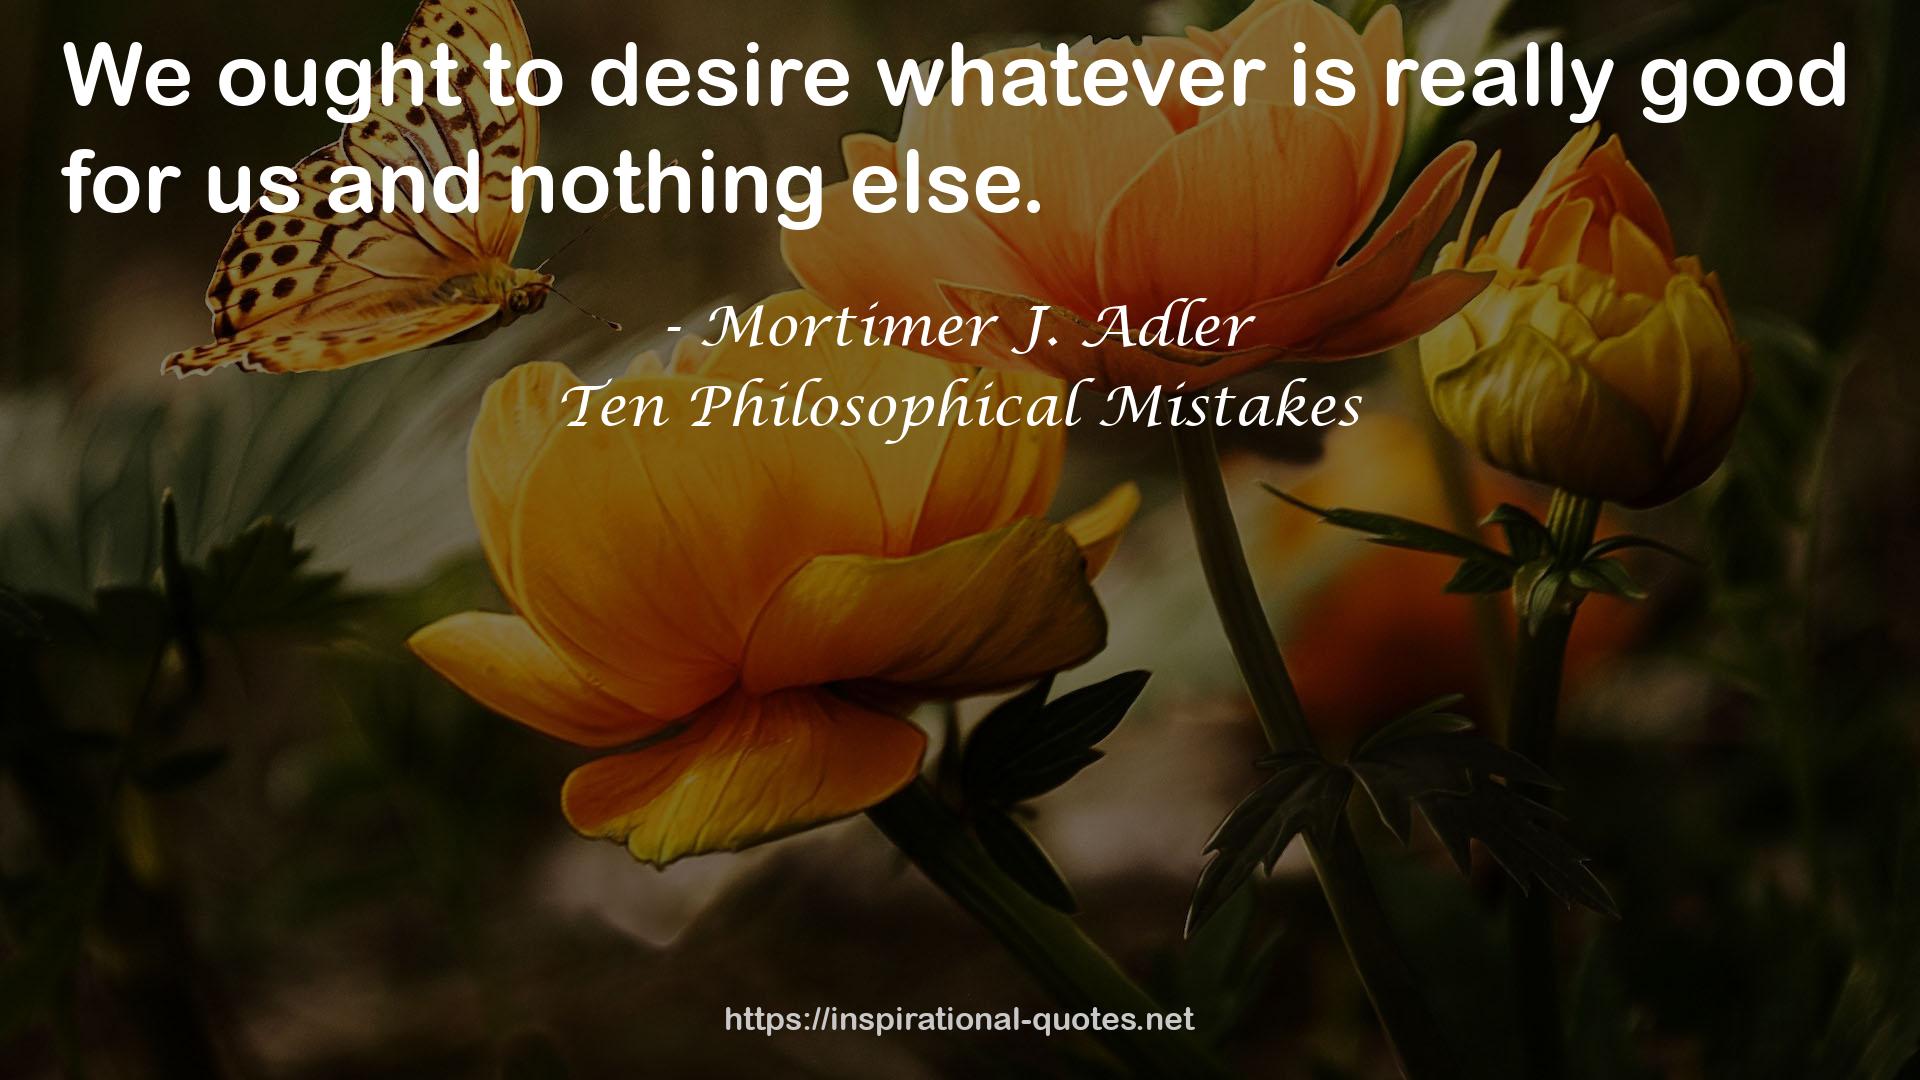 Ten Philosophical Mistakes QUOTES